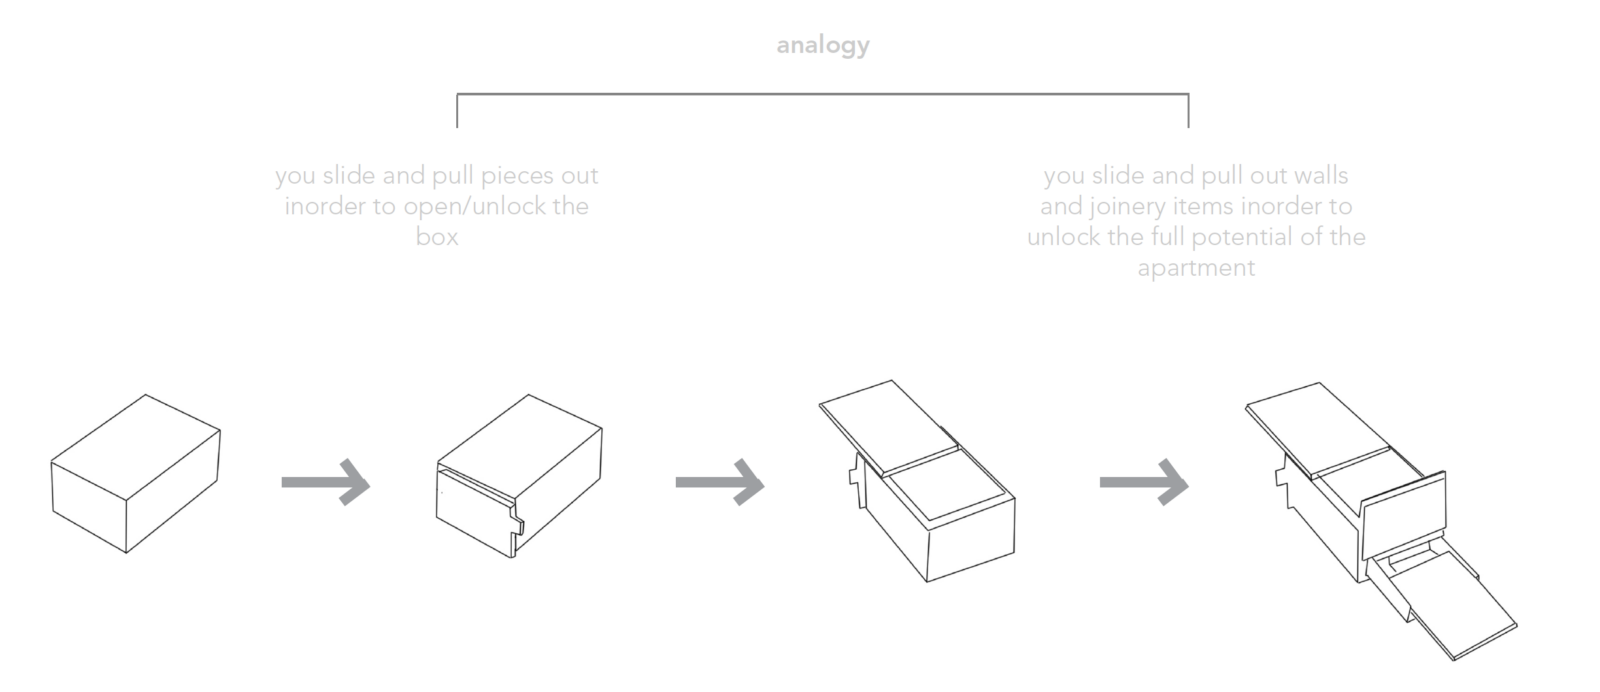 diagram illustrating an analogy of how the puzzle box works in relation to the apartment. ie. you slide and pull pieces out in order to open/unlock the box and you slide and pull out walls and joinery in order to unlock the full potential of the apartment. 